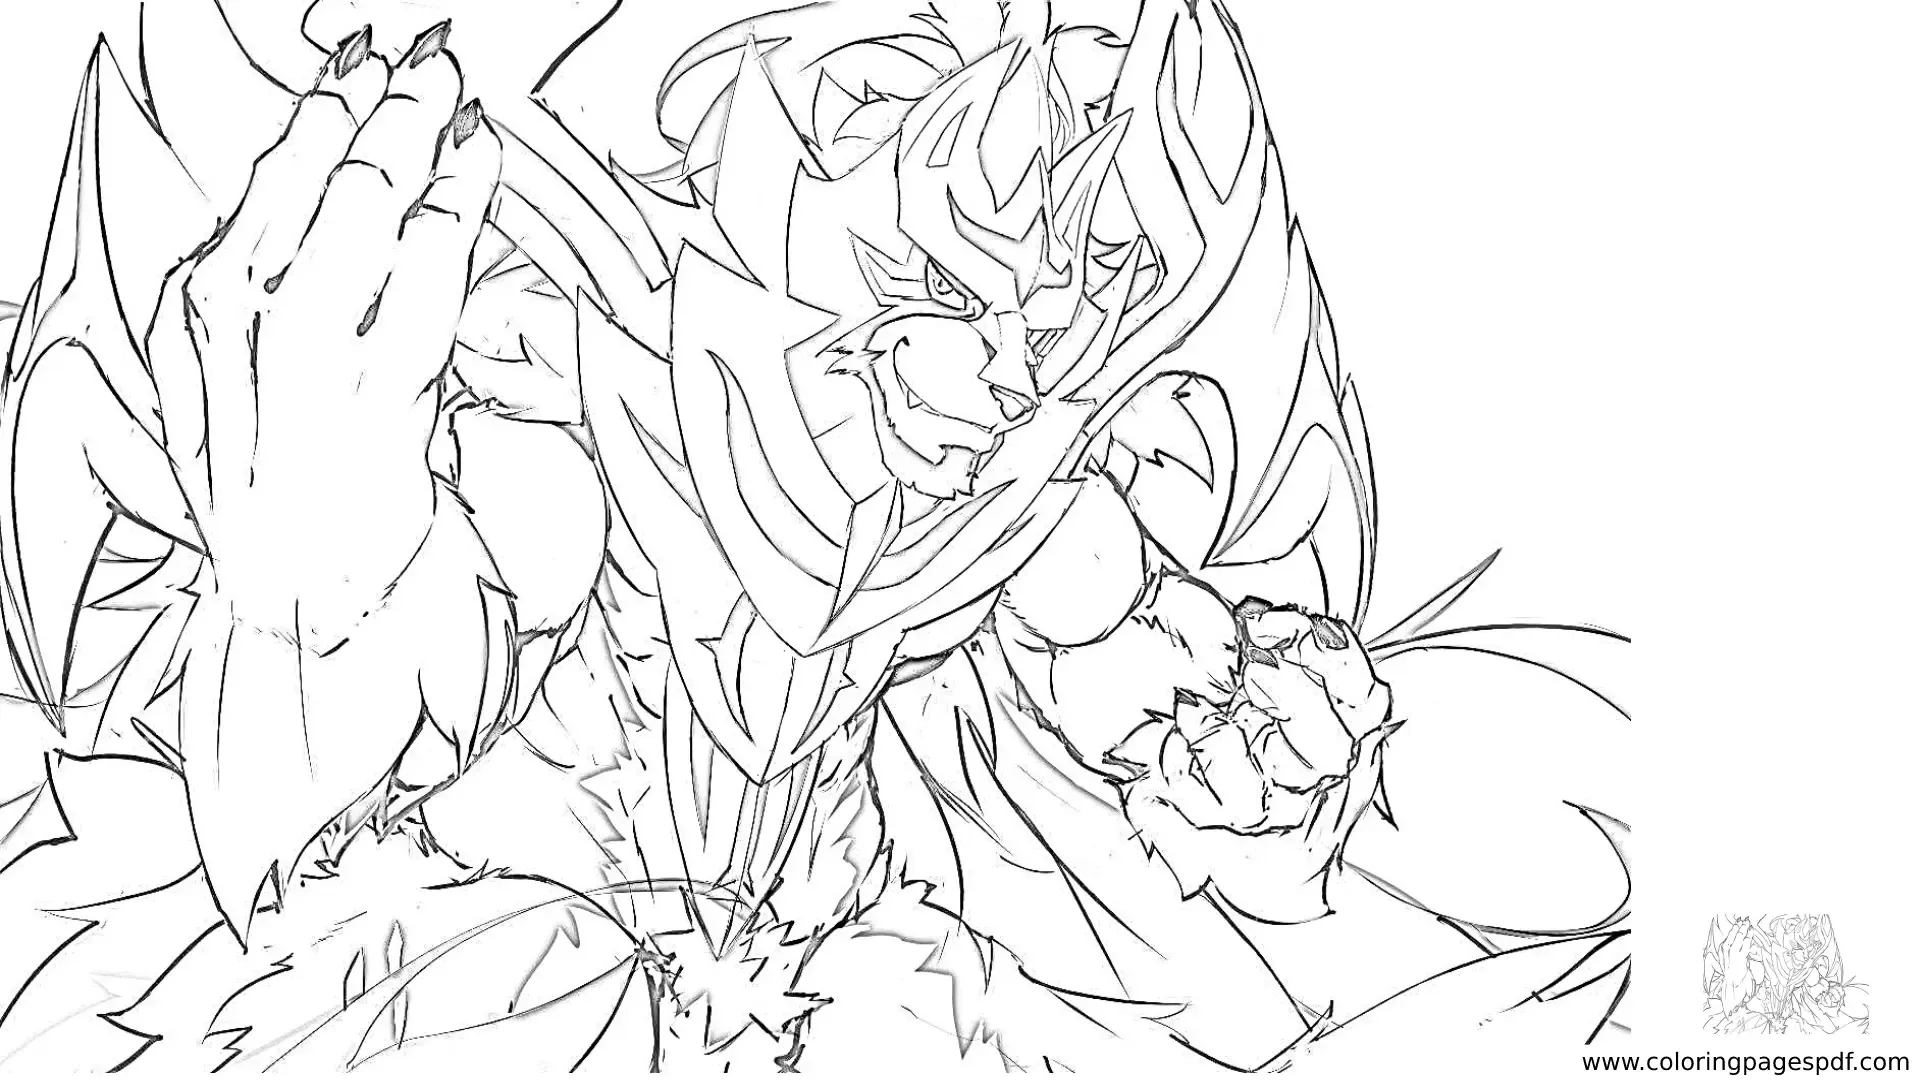 Coloring Page Of Zacian In A Fighting Stance